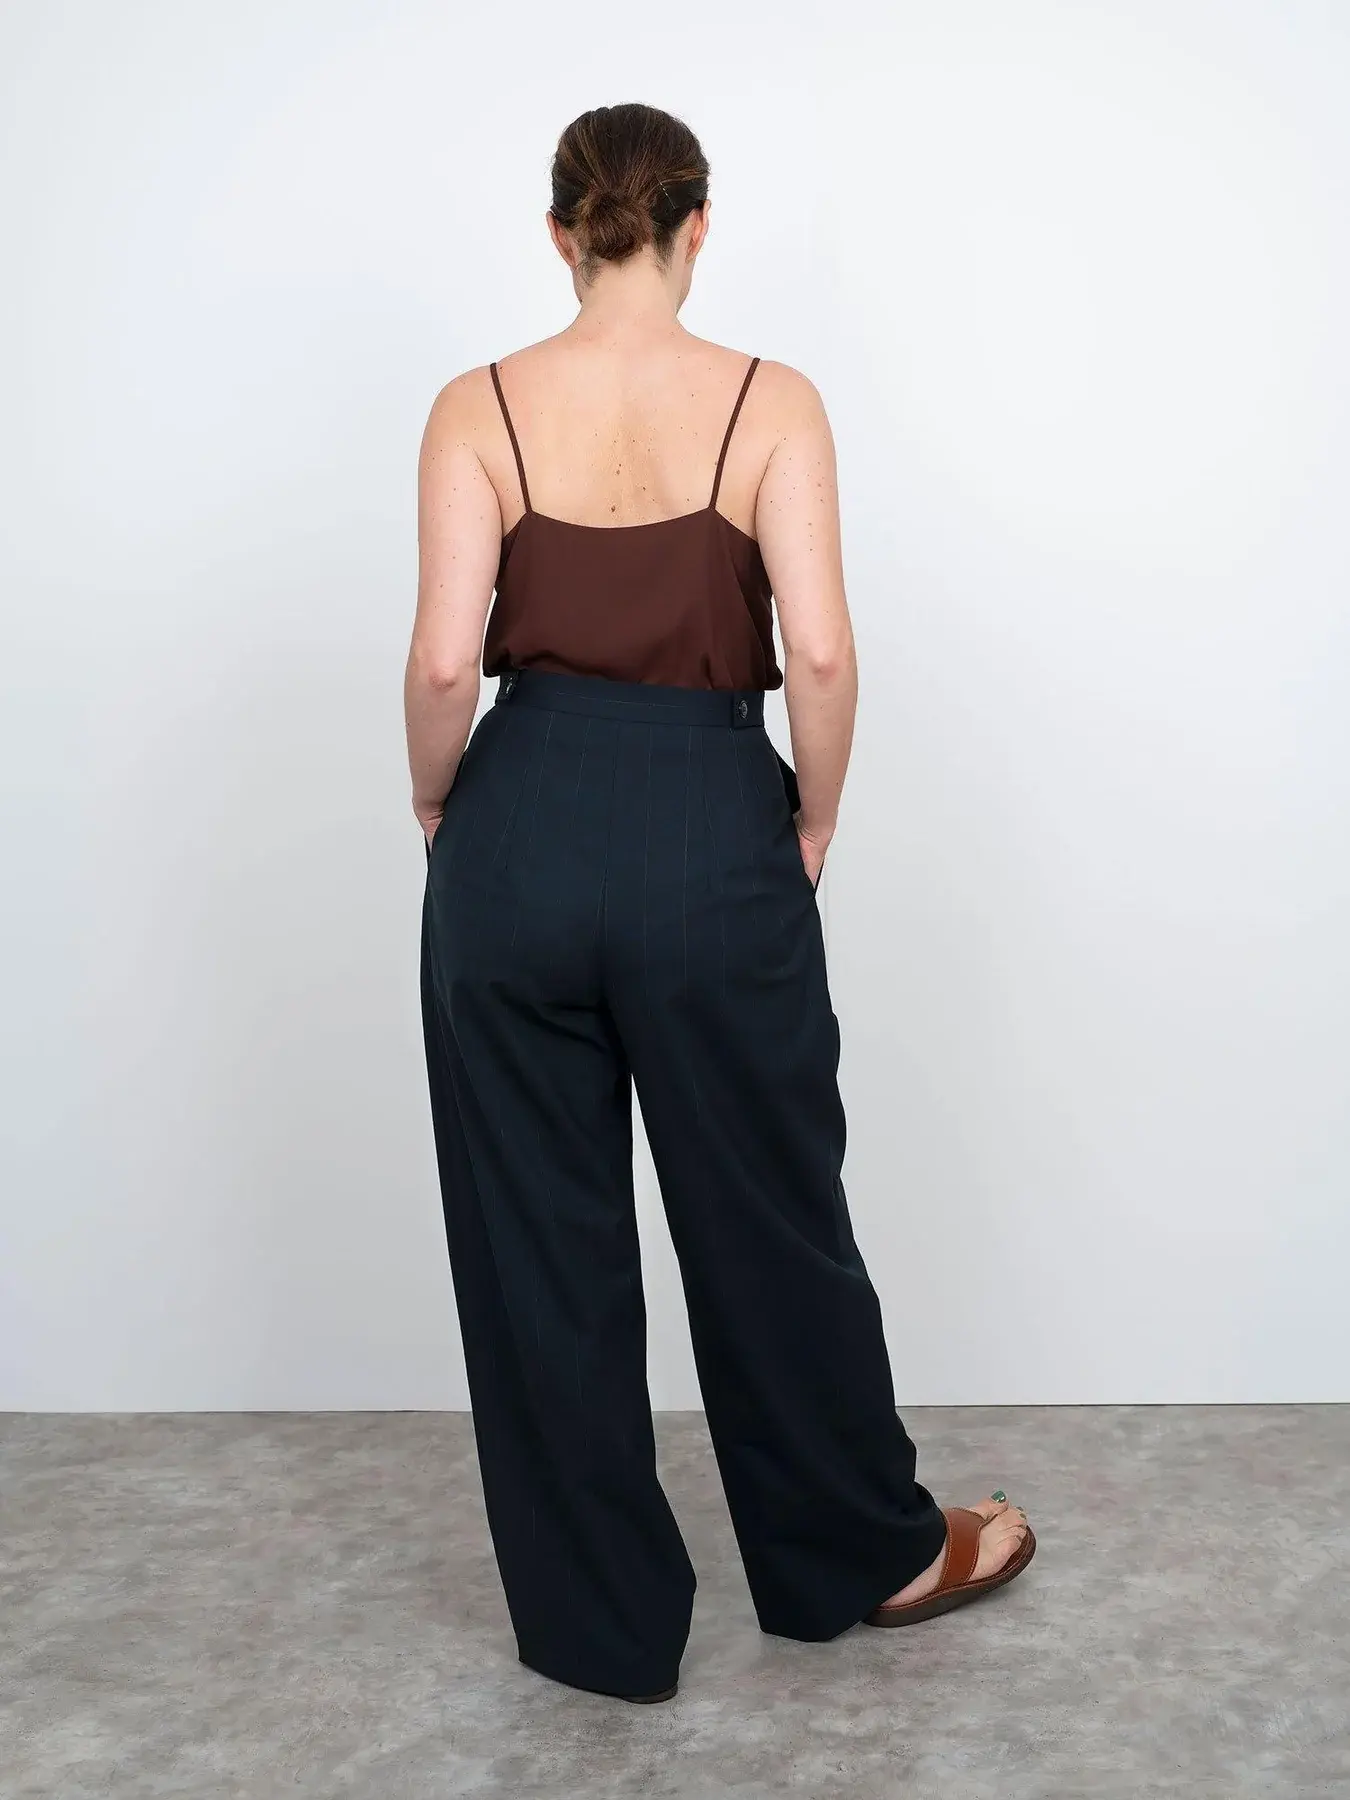 The Assembly Line Patterns The Assembly Line Patterns- High Waisted Trouser XS-L